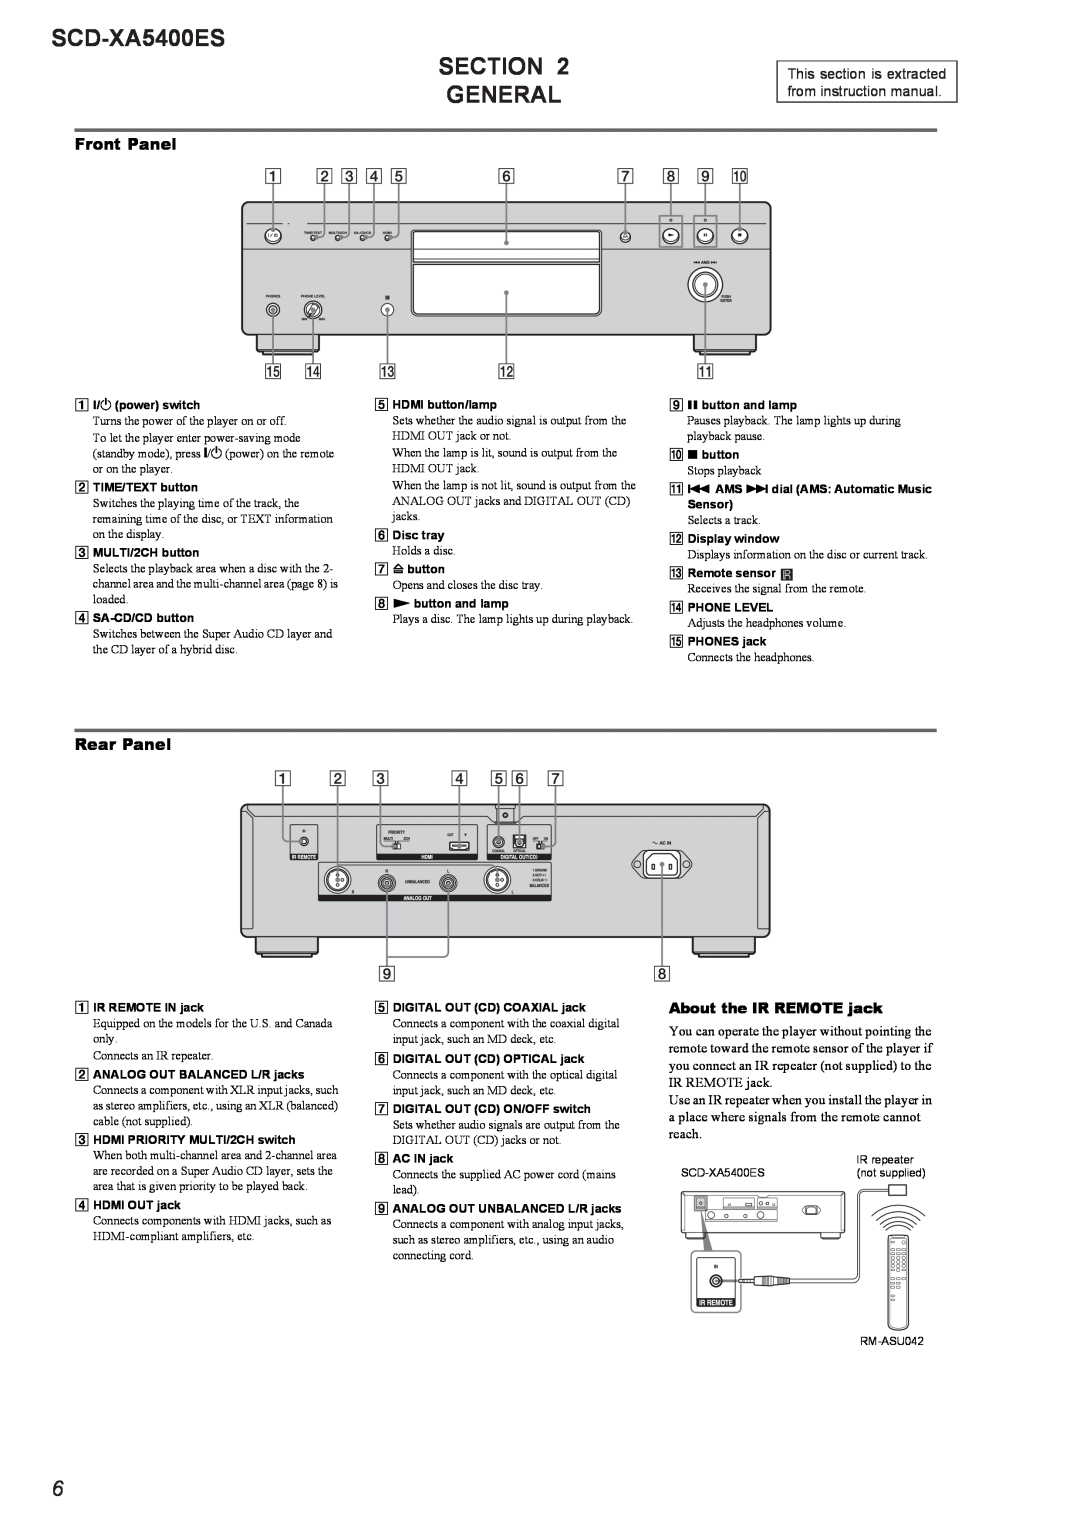 Sony SCD-XA5400ES, 2008H05-1 service manual Section, General, Front Panel, Rear Panel, About the IR REMOTE jack 